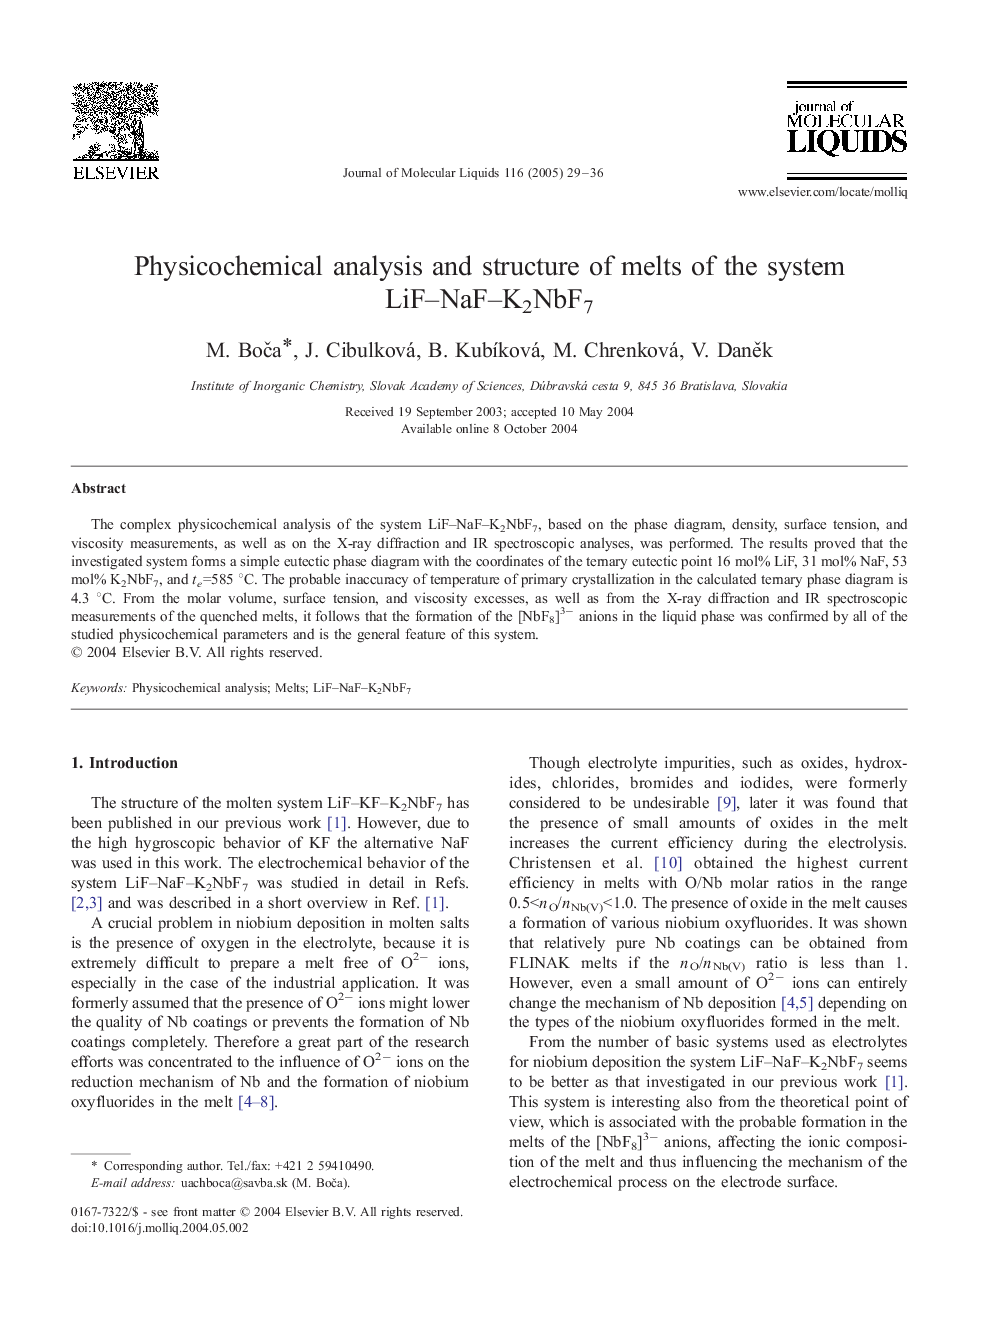 Physicochemical analysis and structure of melts of the system LiF-NaF-K2NbF7